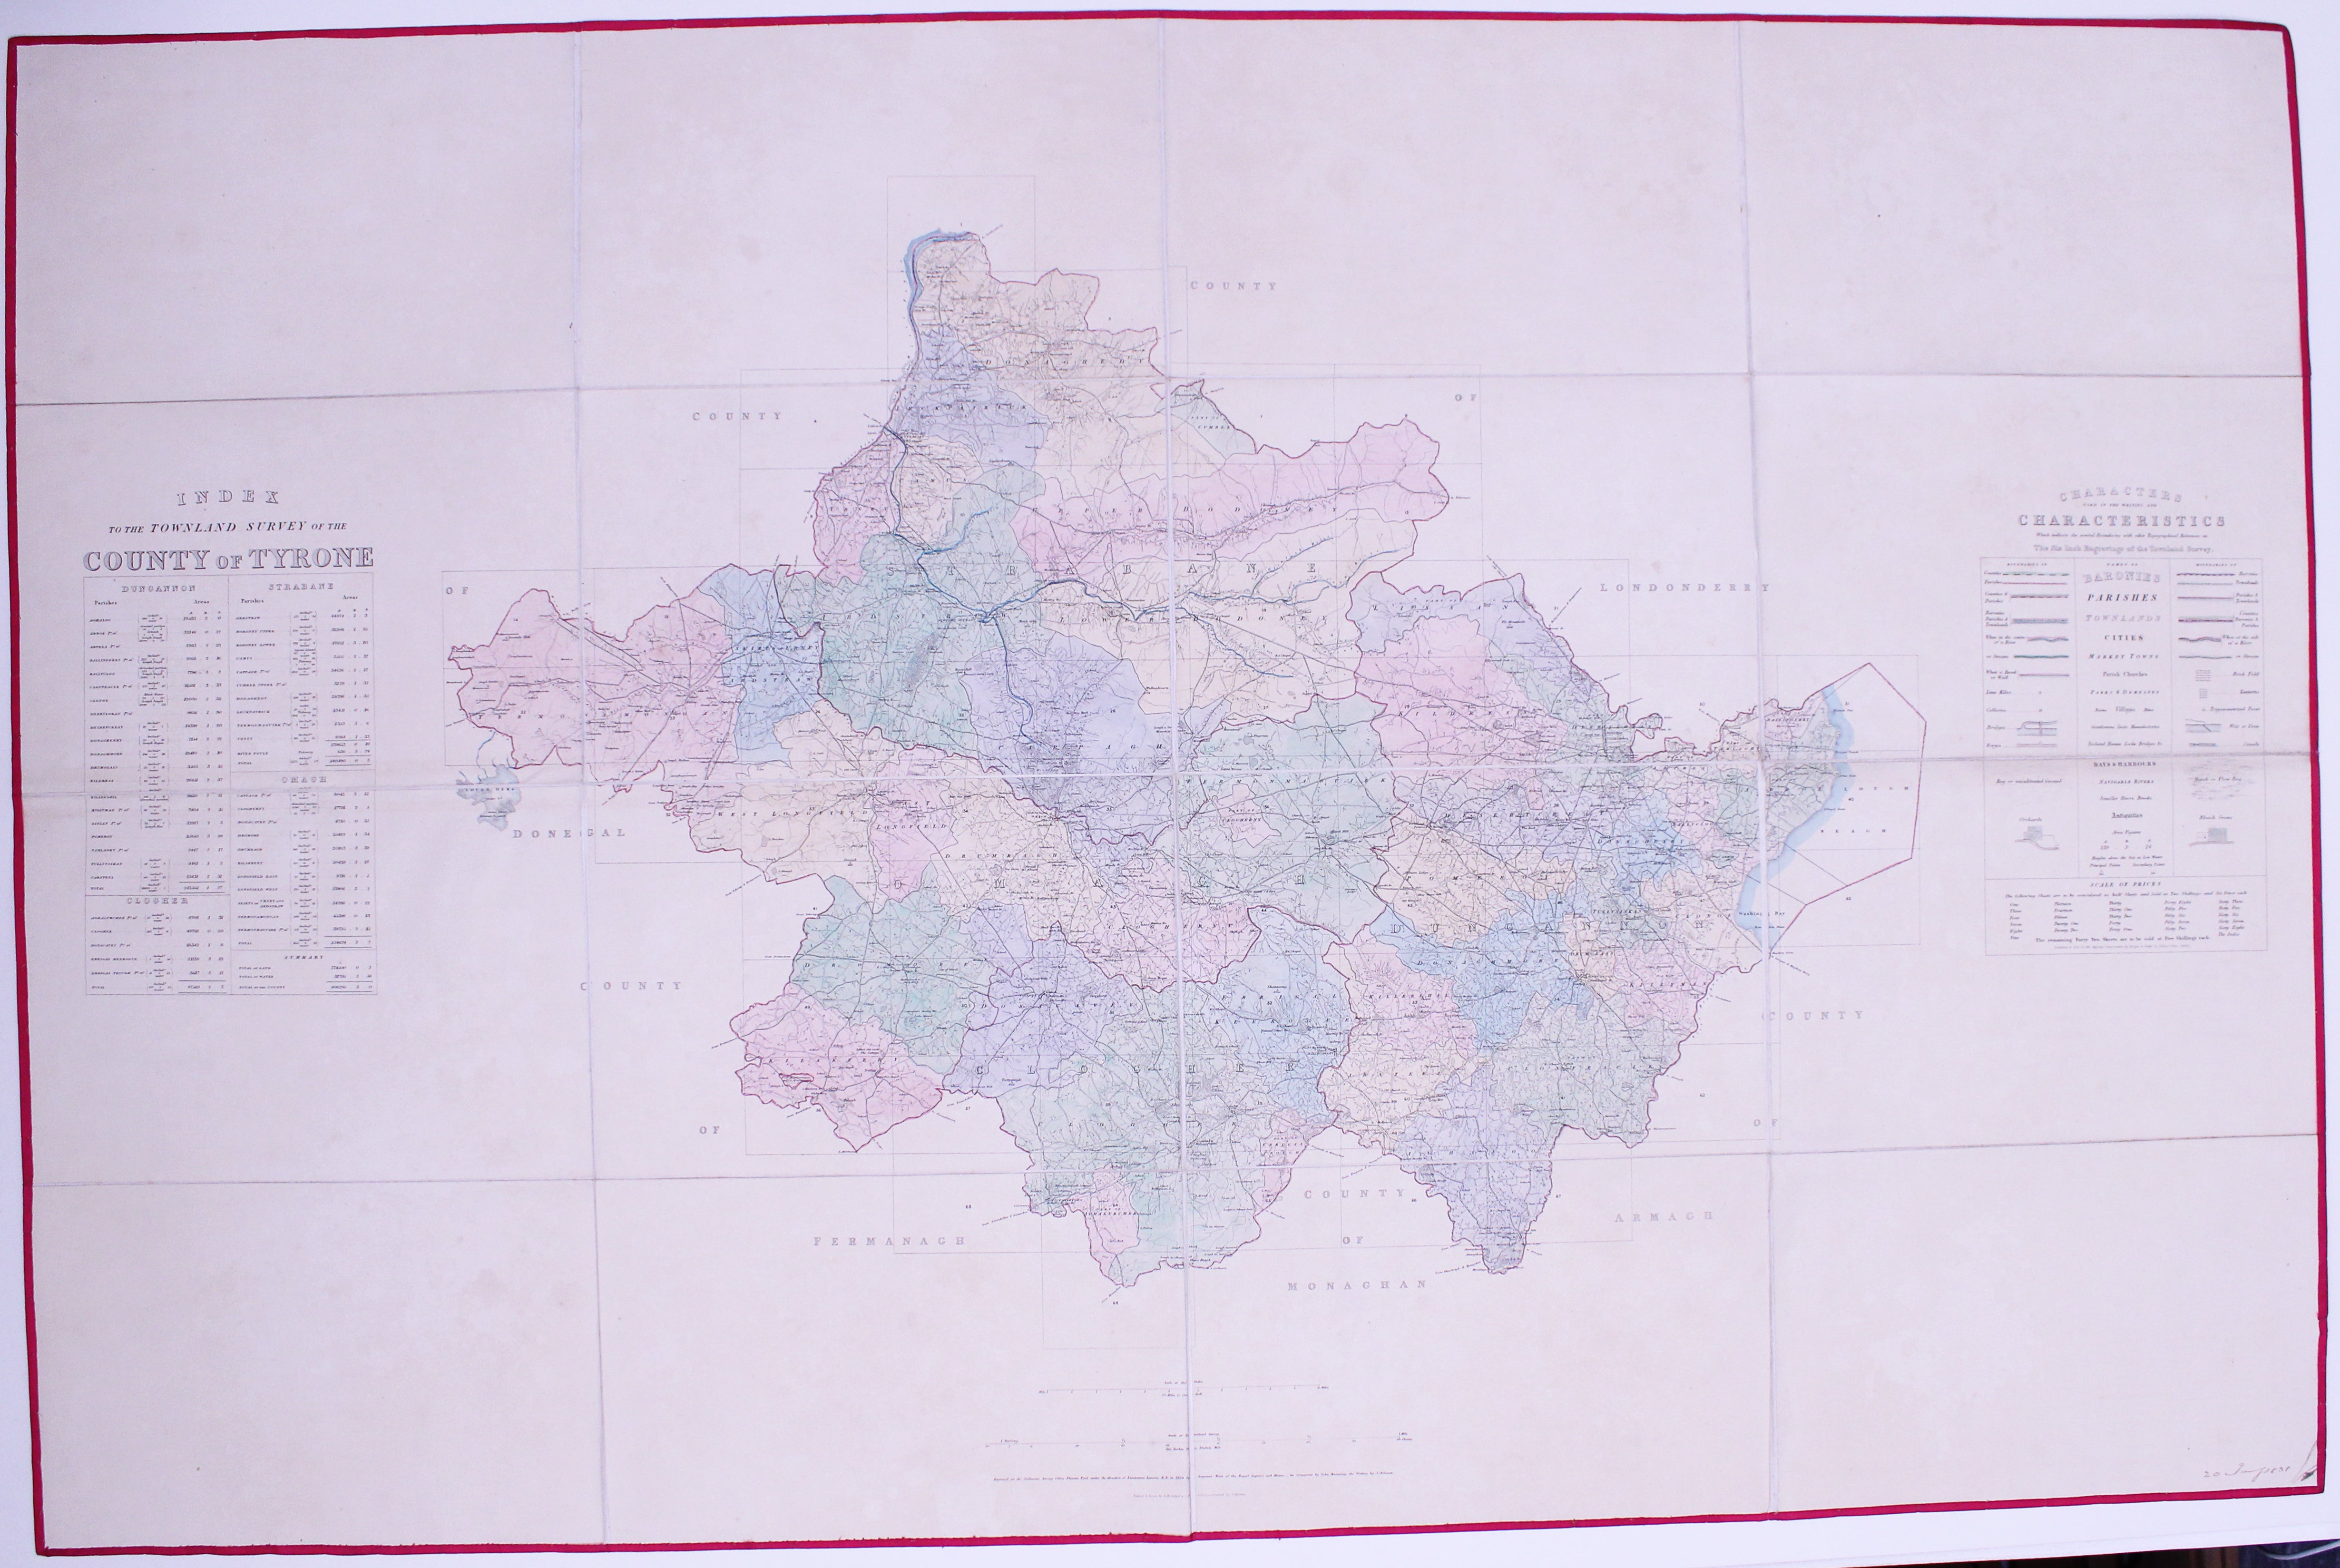 Index Map to the Townland Survey of the County of Tyrone